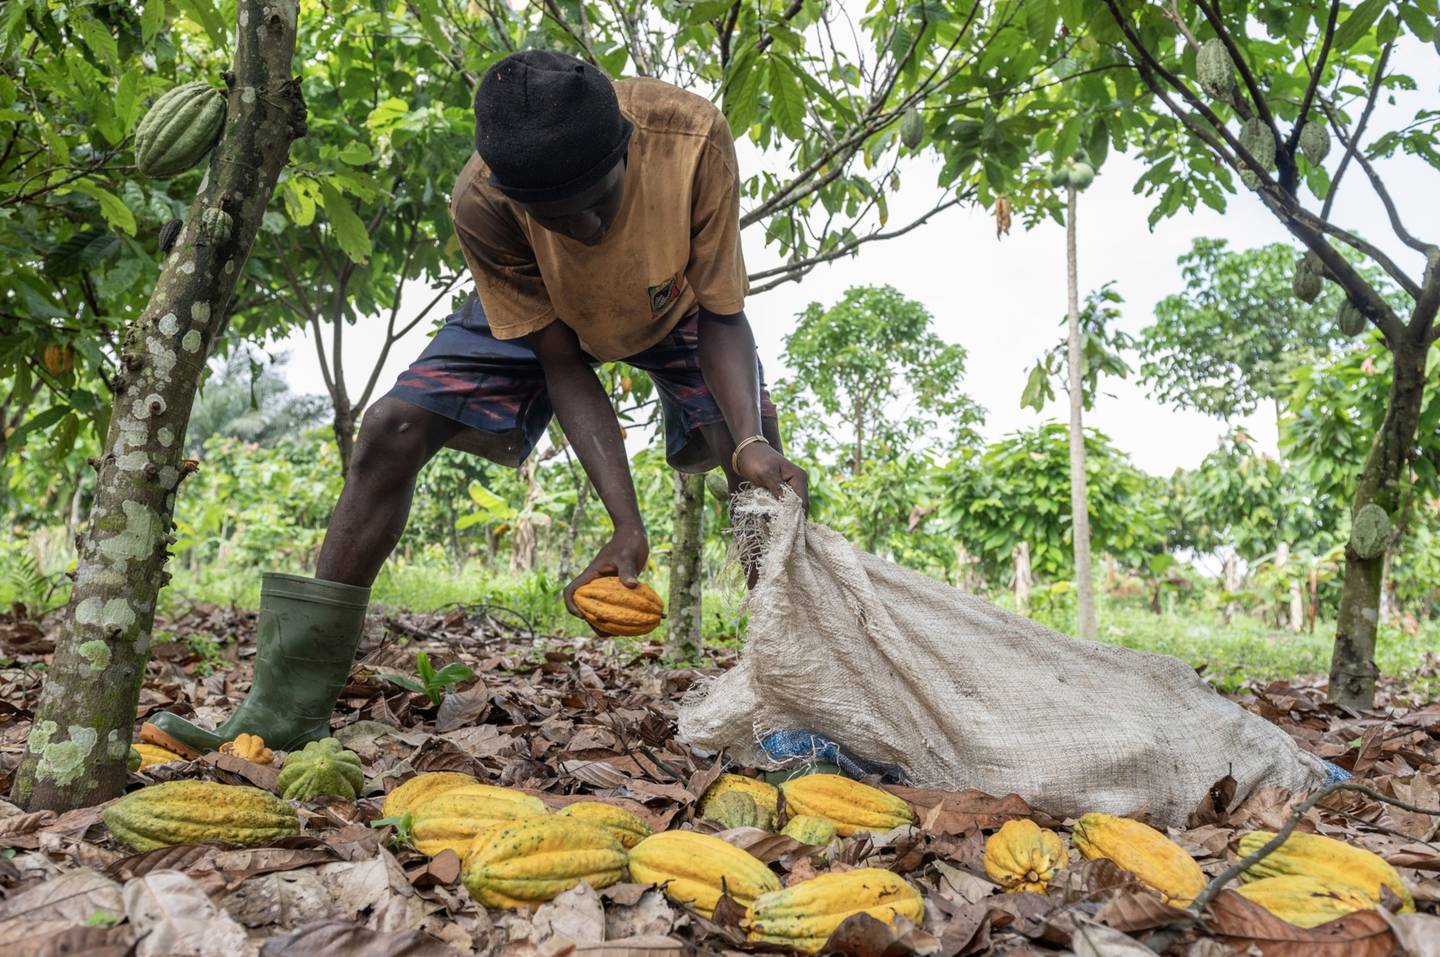 A worker gathers cocoa pods cut from trees into a sack on a farm in Azaguie, Ivory Coast, on Friday, Nov. 18, 2022. As favorable weather in Ivory Coast boosts the quality of the country's cocoa bean harvest, poor road access means some farmers in the world's top supplier of the chocolate-making ingredient are getting paid below the farm-gate rate for their crop.dfd